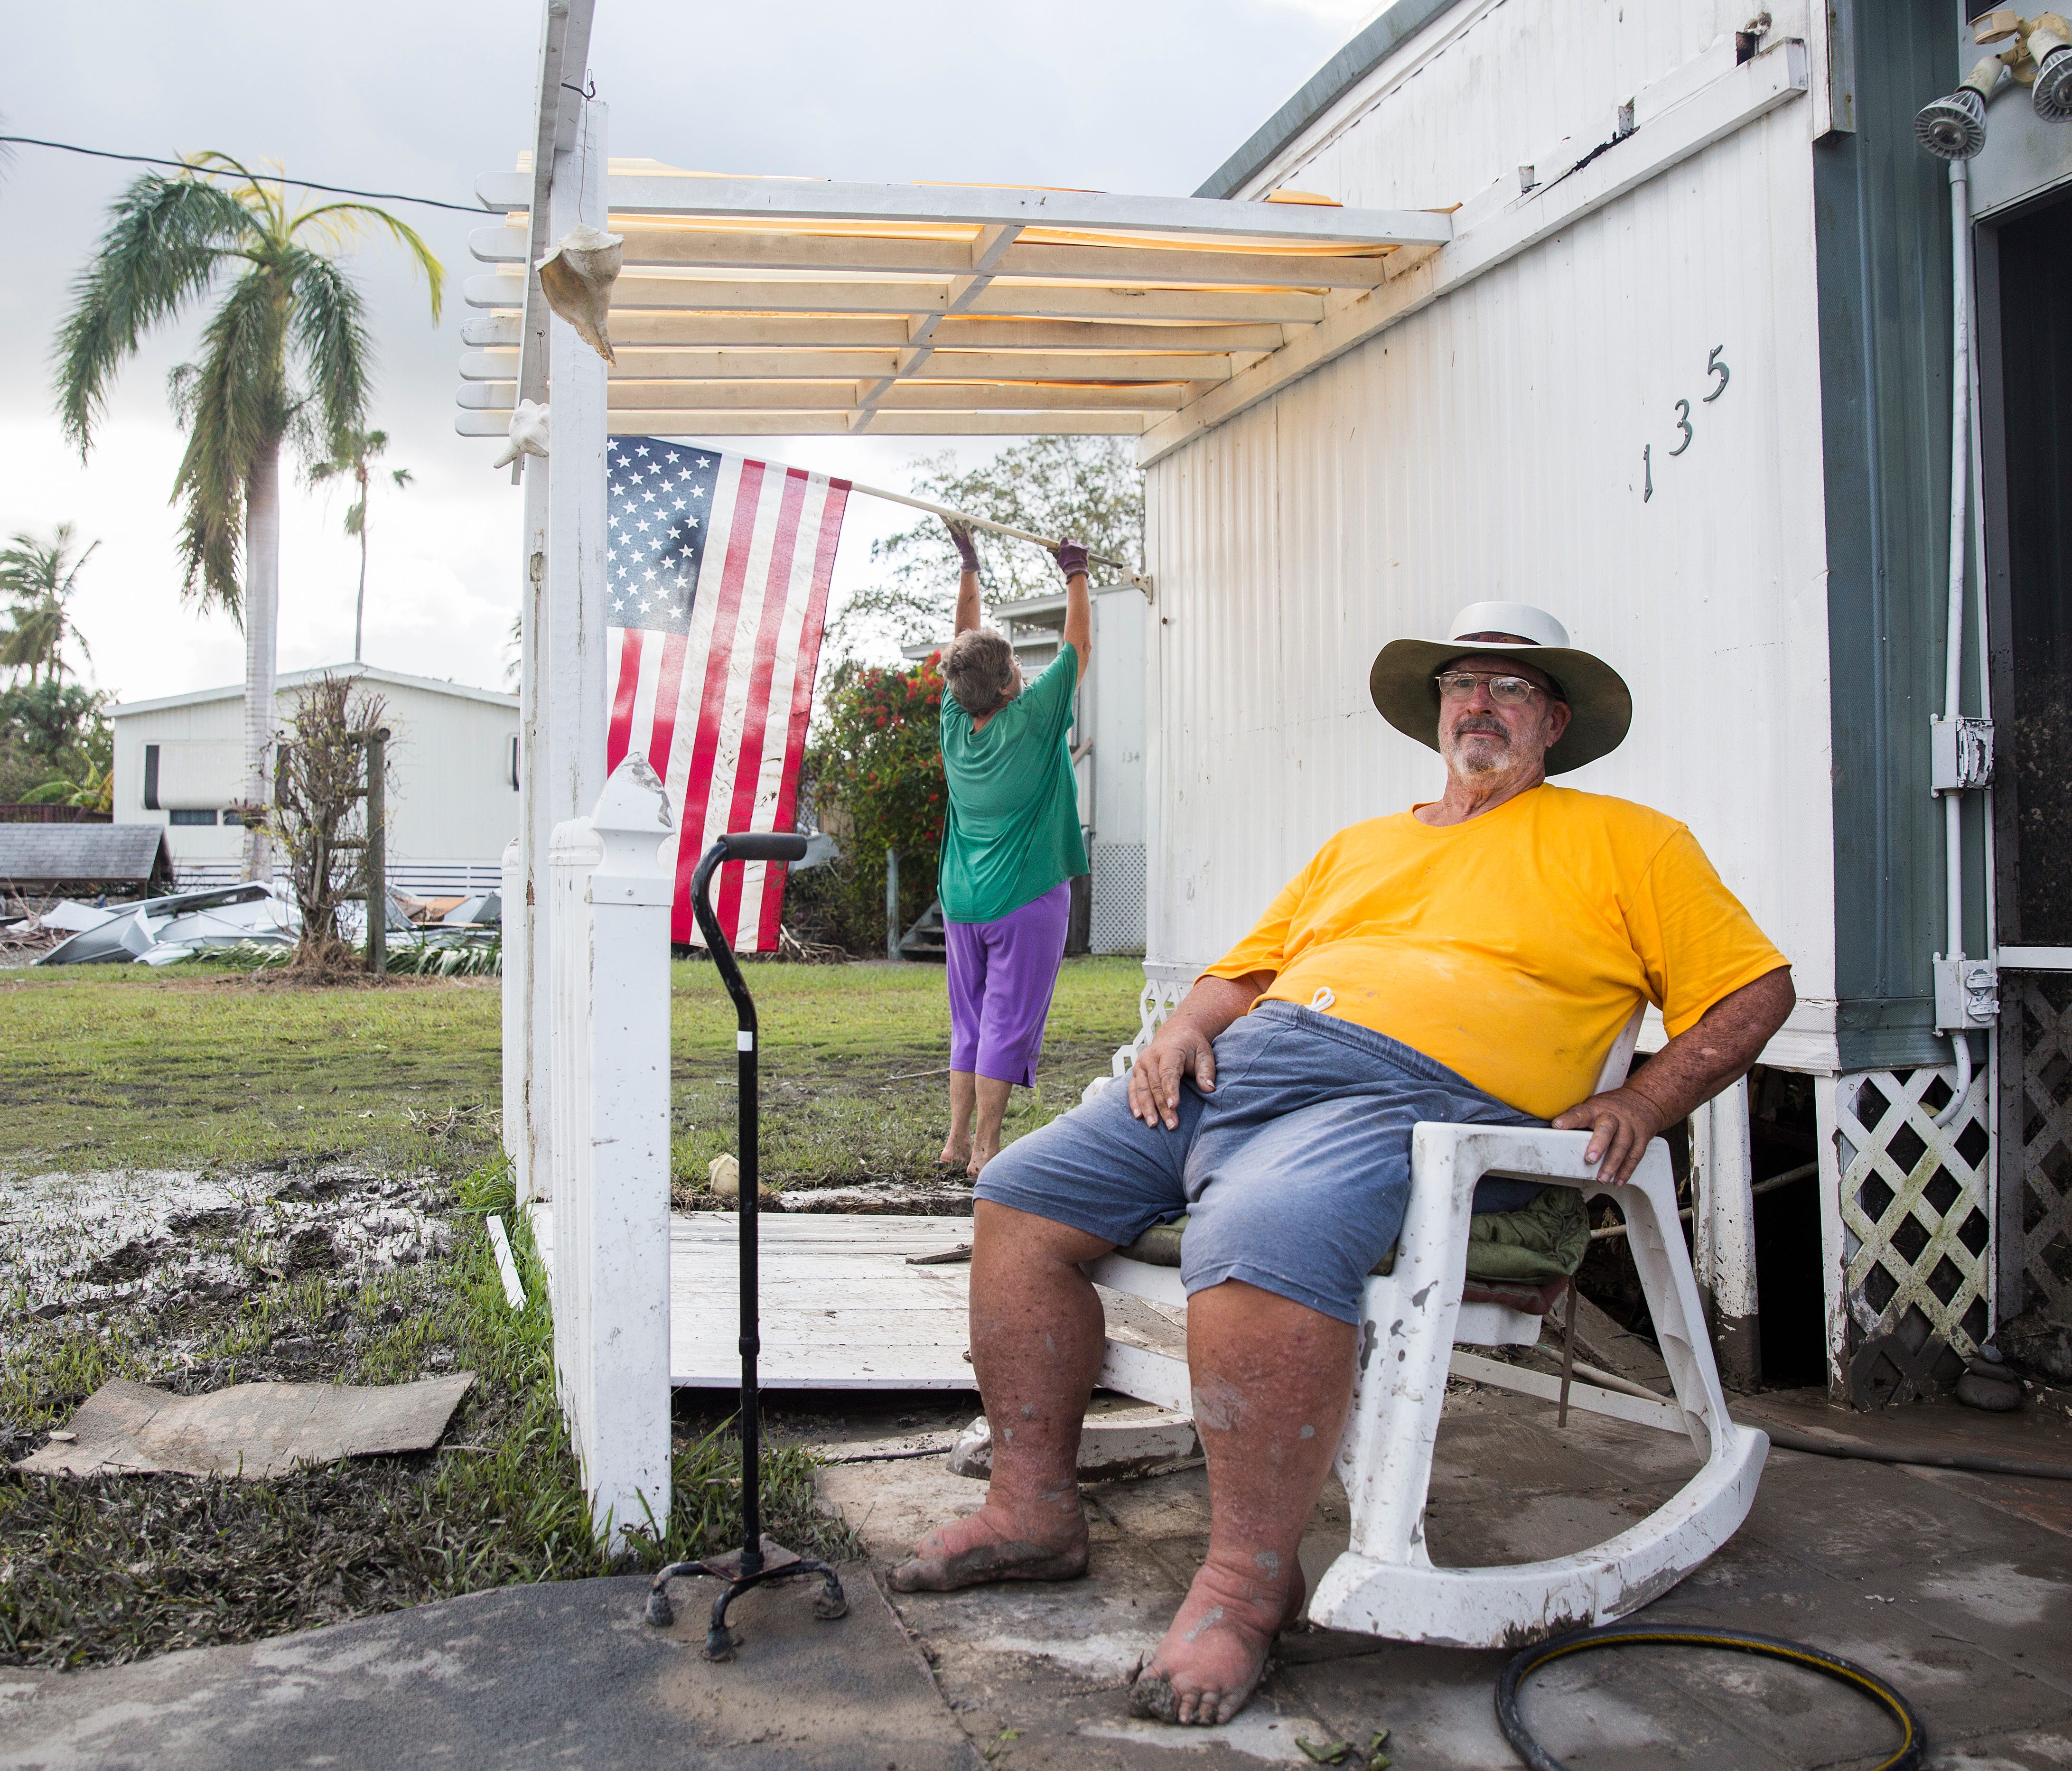 Lee and Lisa Marteeny's home hadsevere water and wind damage from Hurricane Irma in Plantation Island, an unincorporated area nearby Everglades City, shown on Tuesday, Sept. 12, 2017.